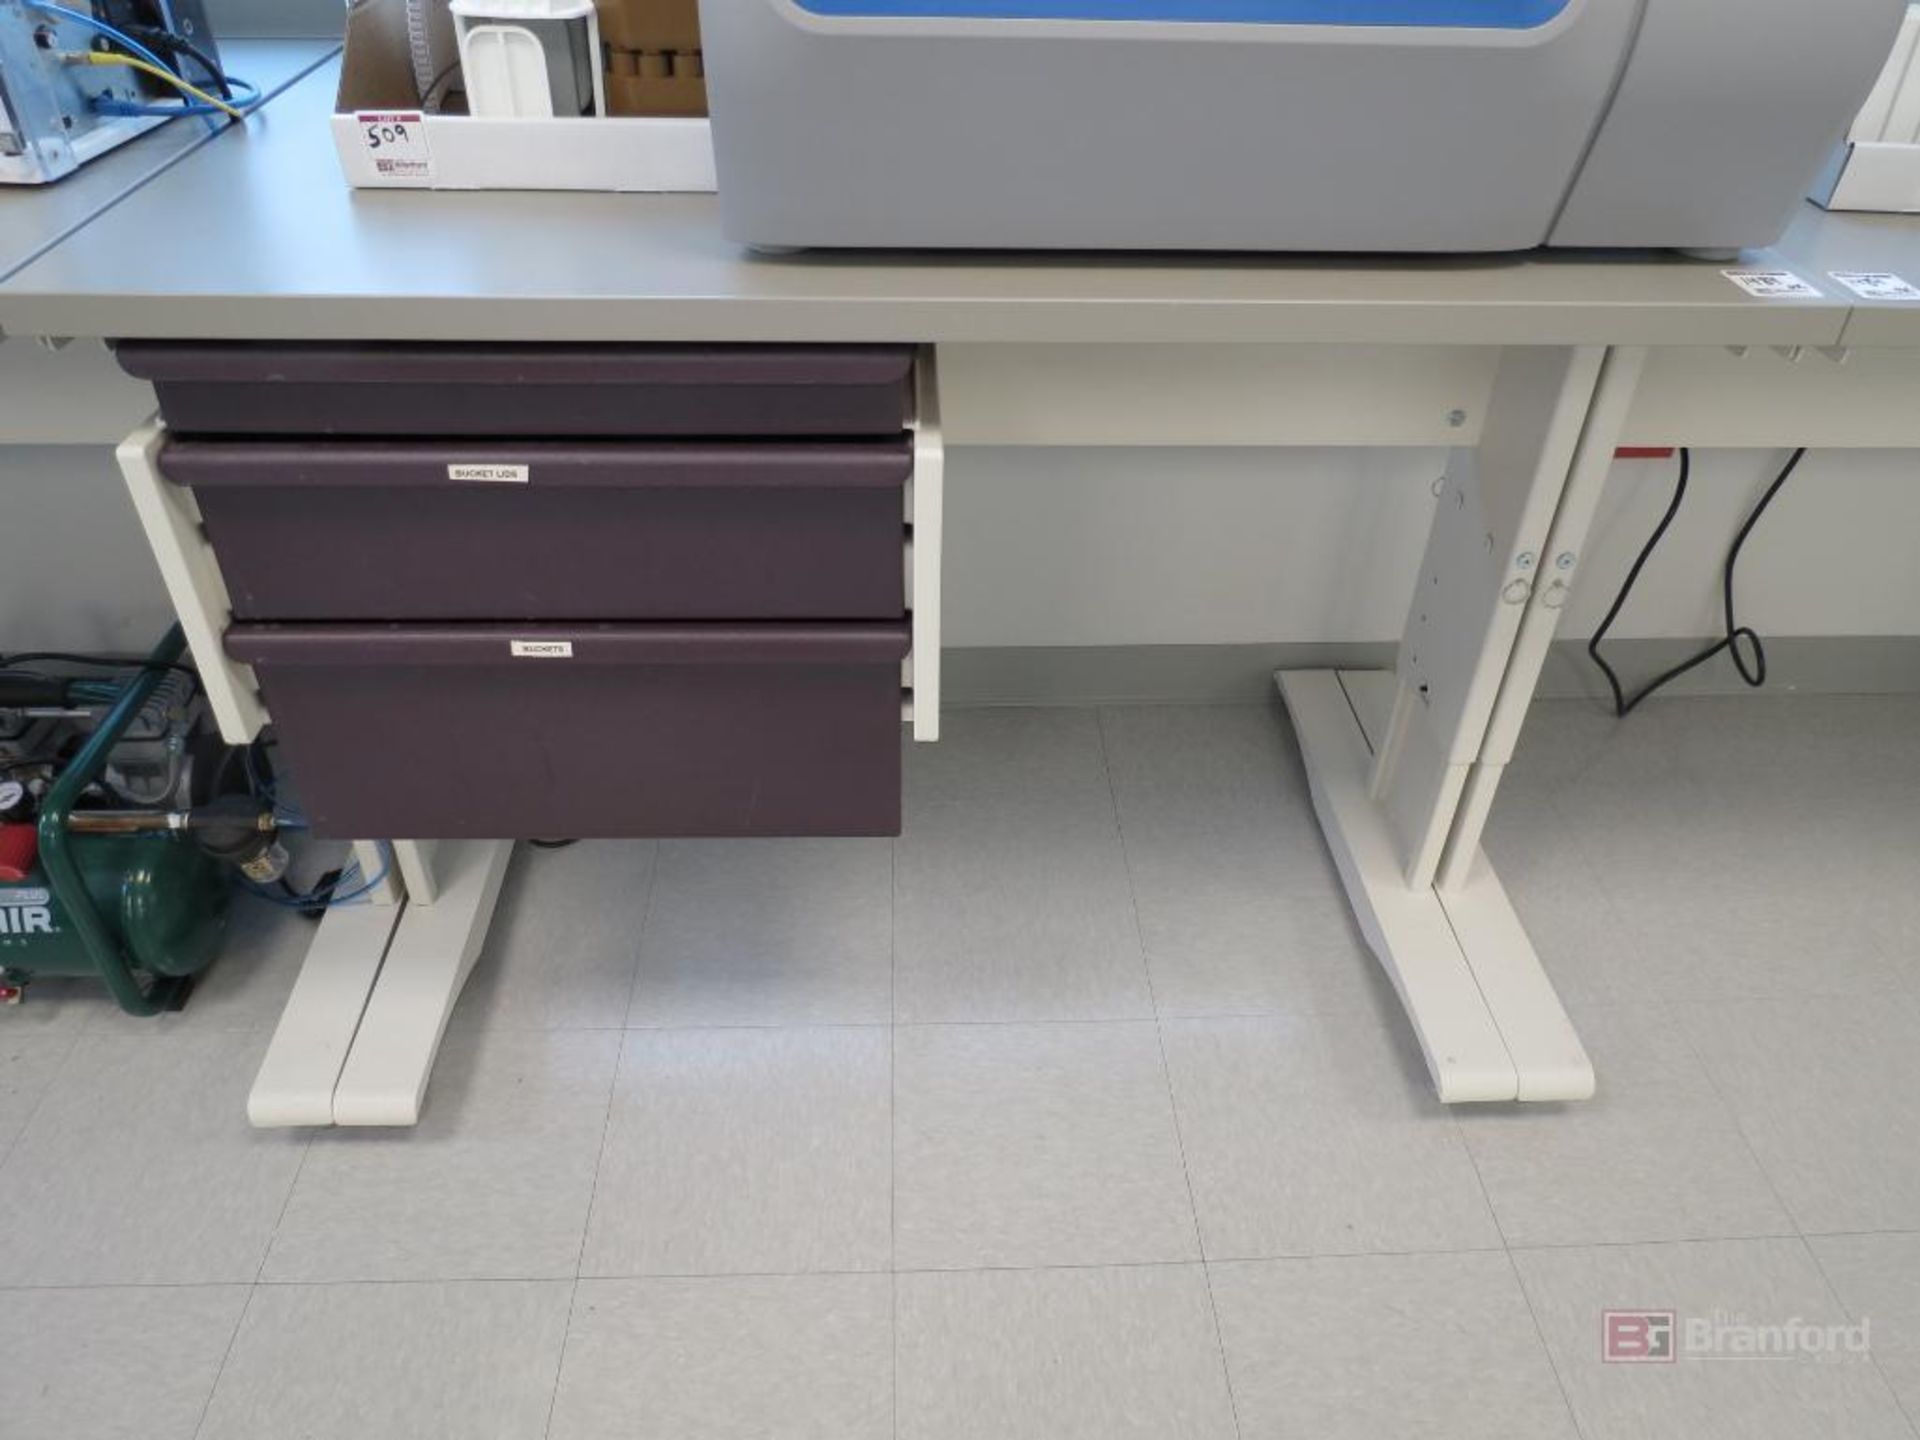 (2) Herman Miller for Healthcare Lab/Medical 4' Wide Benches, - Image 2 of 3